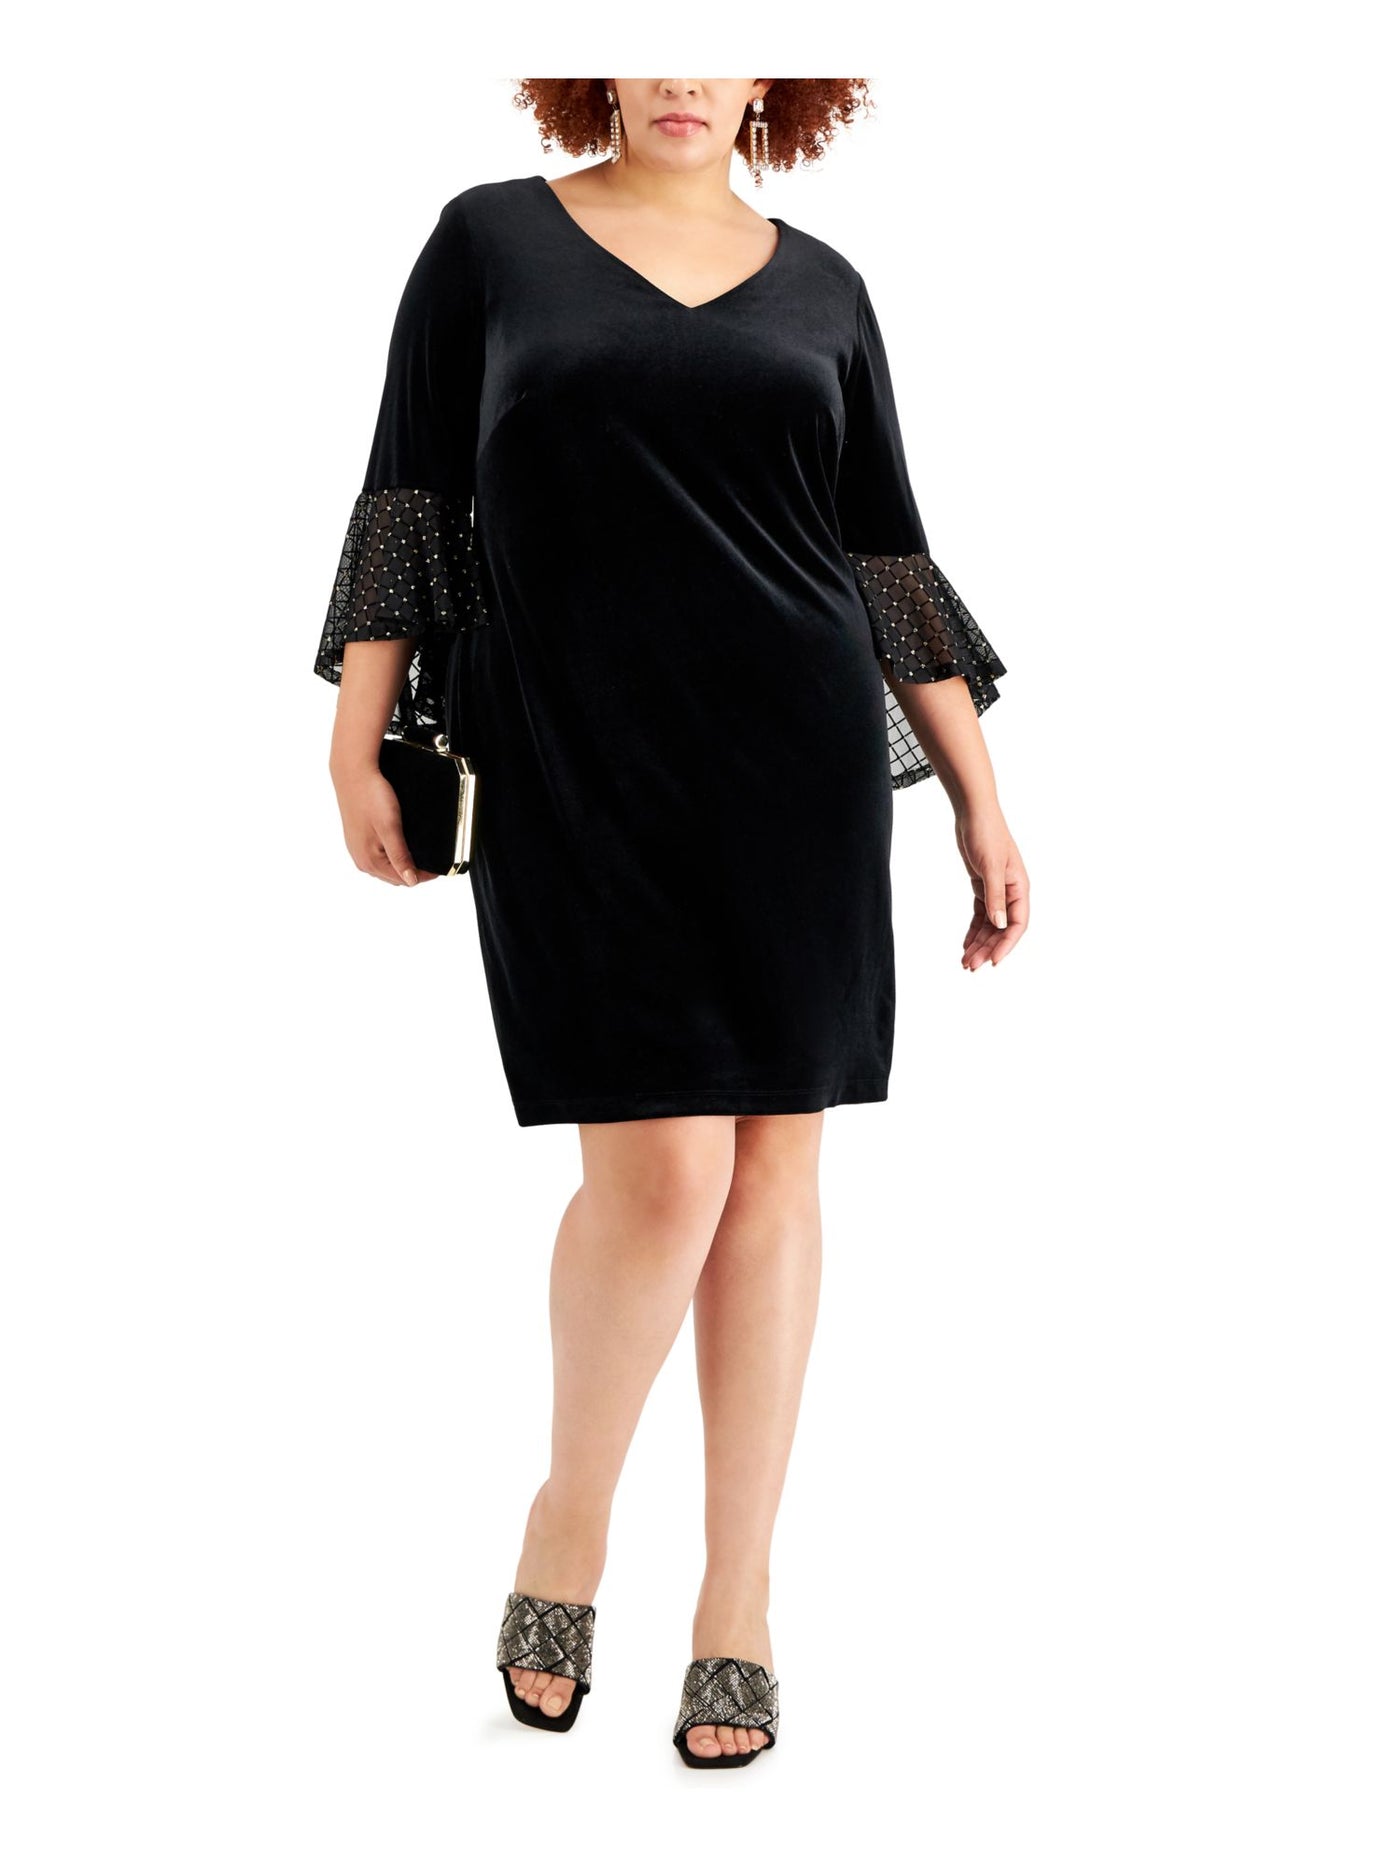 CONNECTED APPAREL Womens Black Stretch Embellished Ruffled Velvet Pullover 3/4 Sleeve V Neck Above The Knee Party Sheath Dress Plus 24W